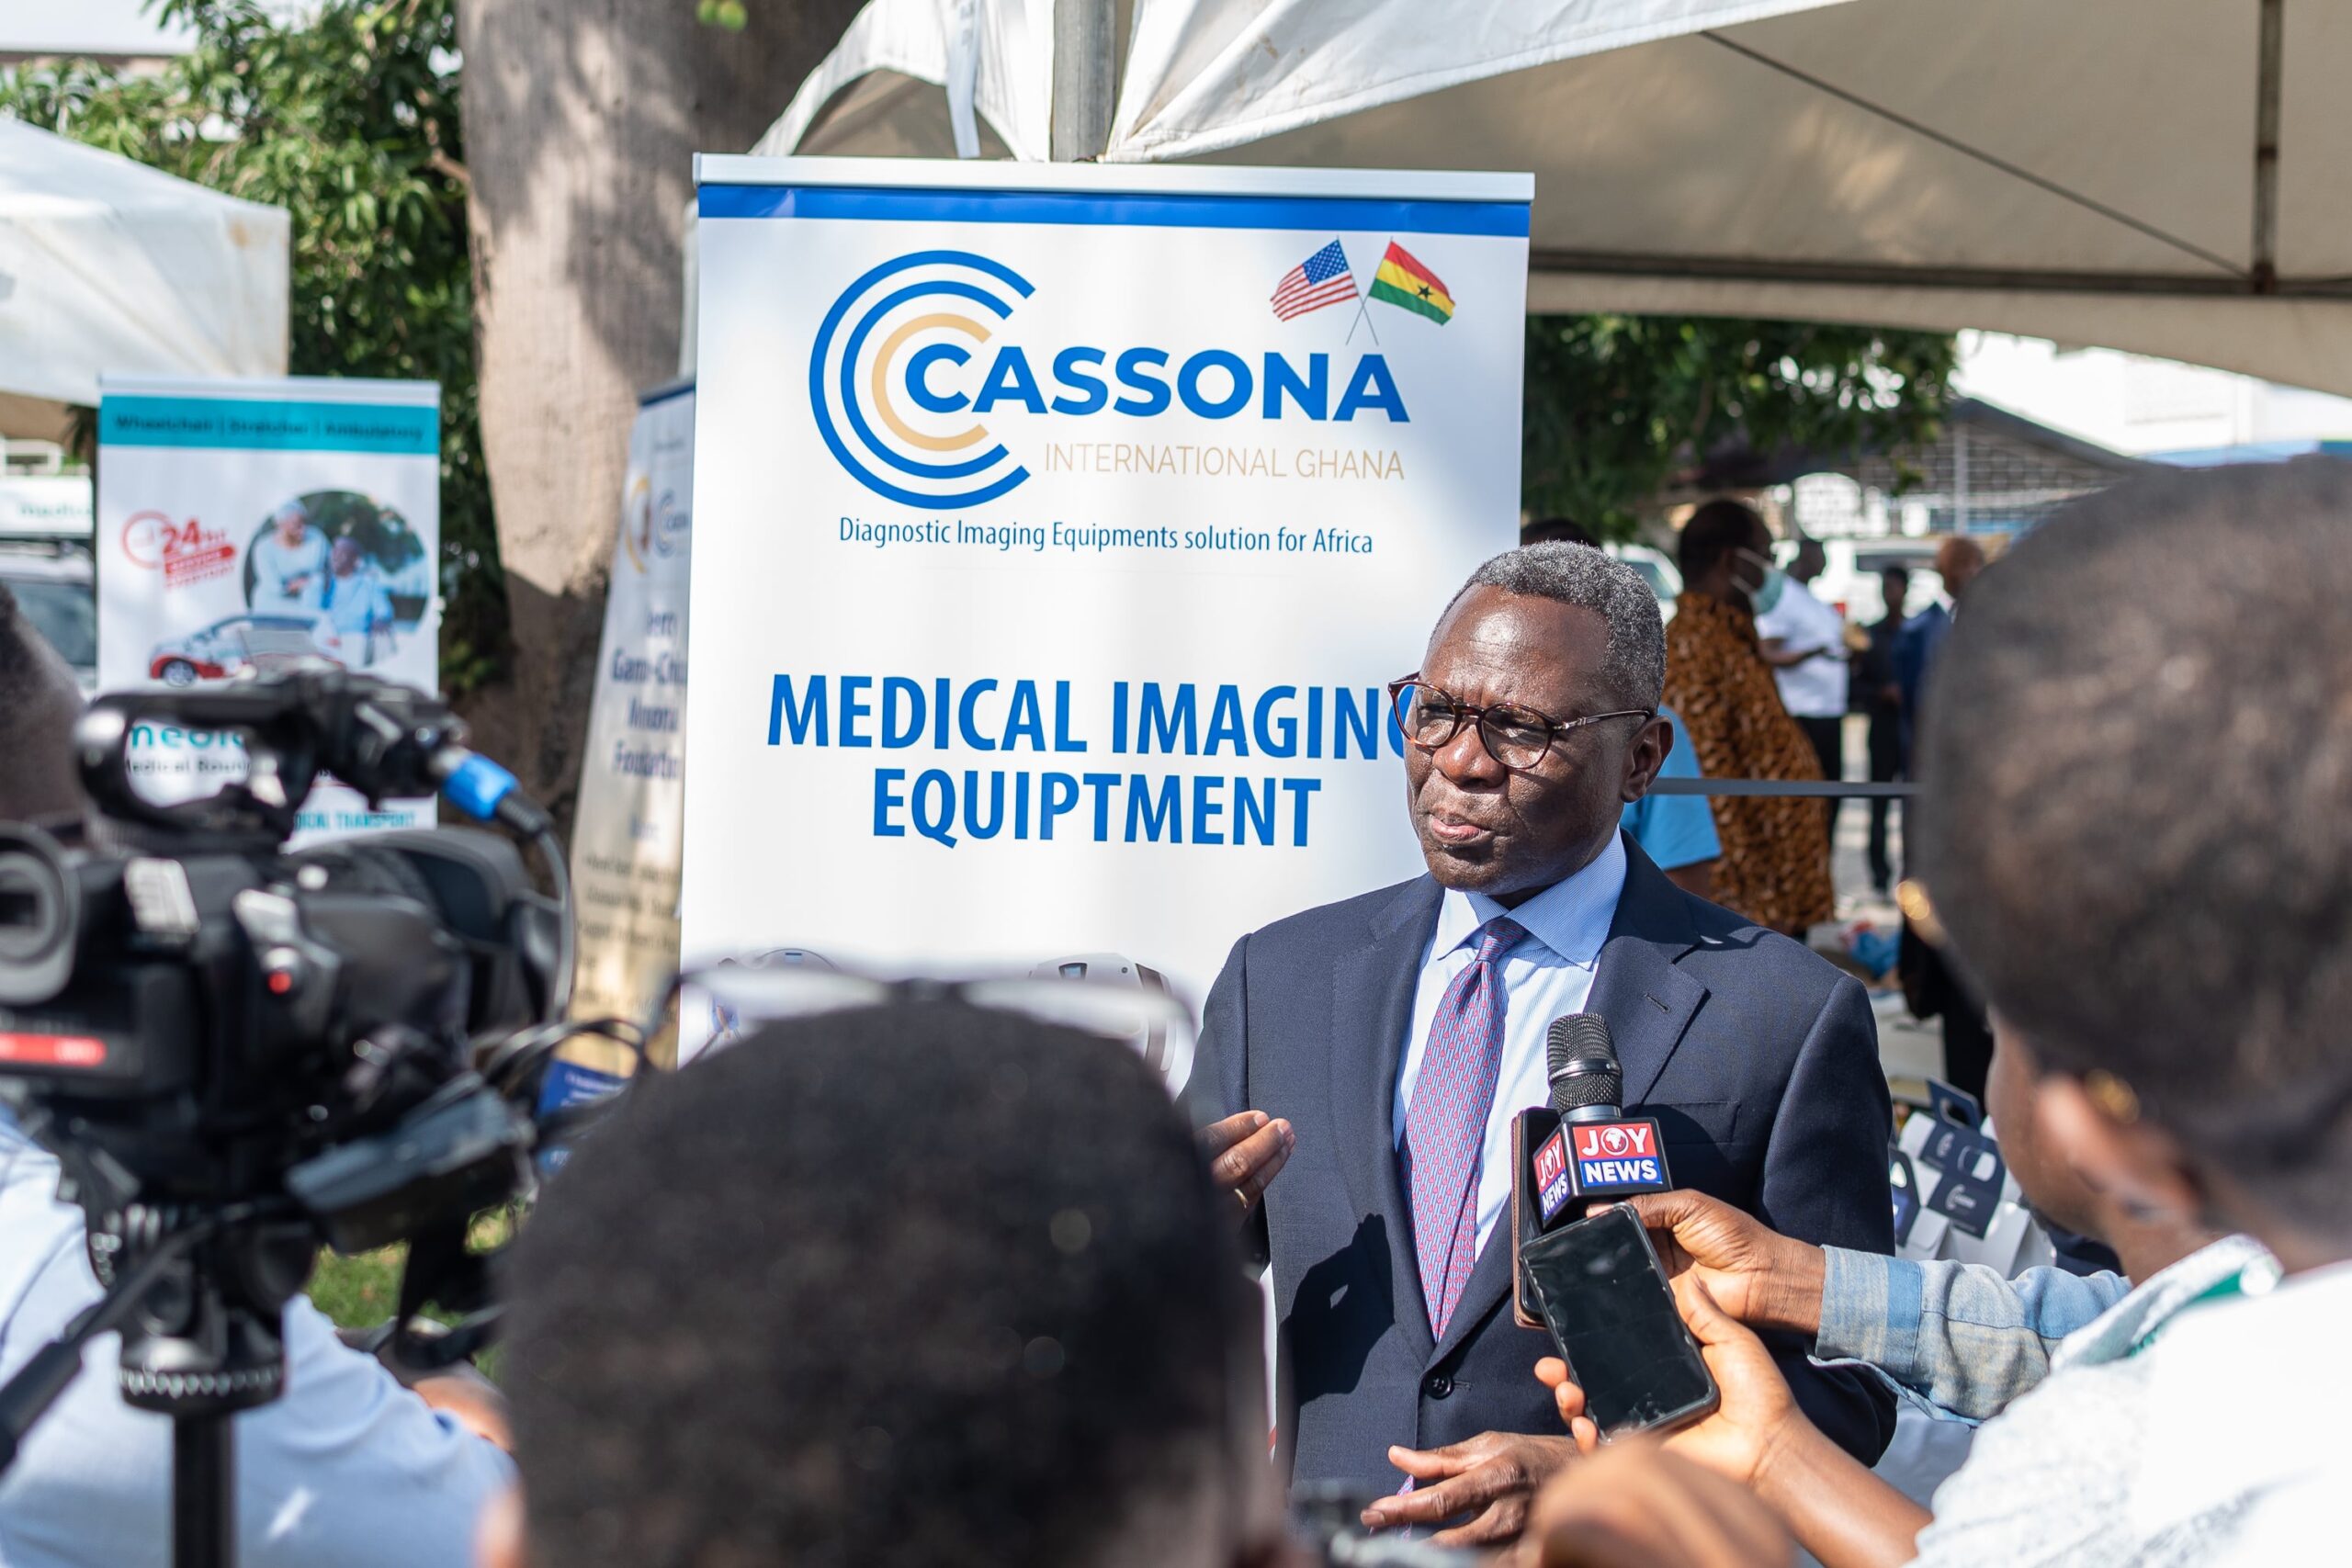 Health facilities need affordable medical imaging equipment – Cassona CEO